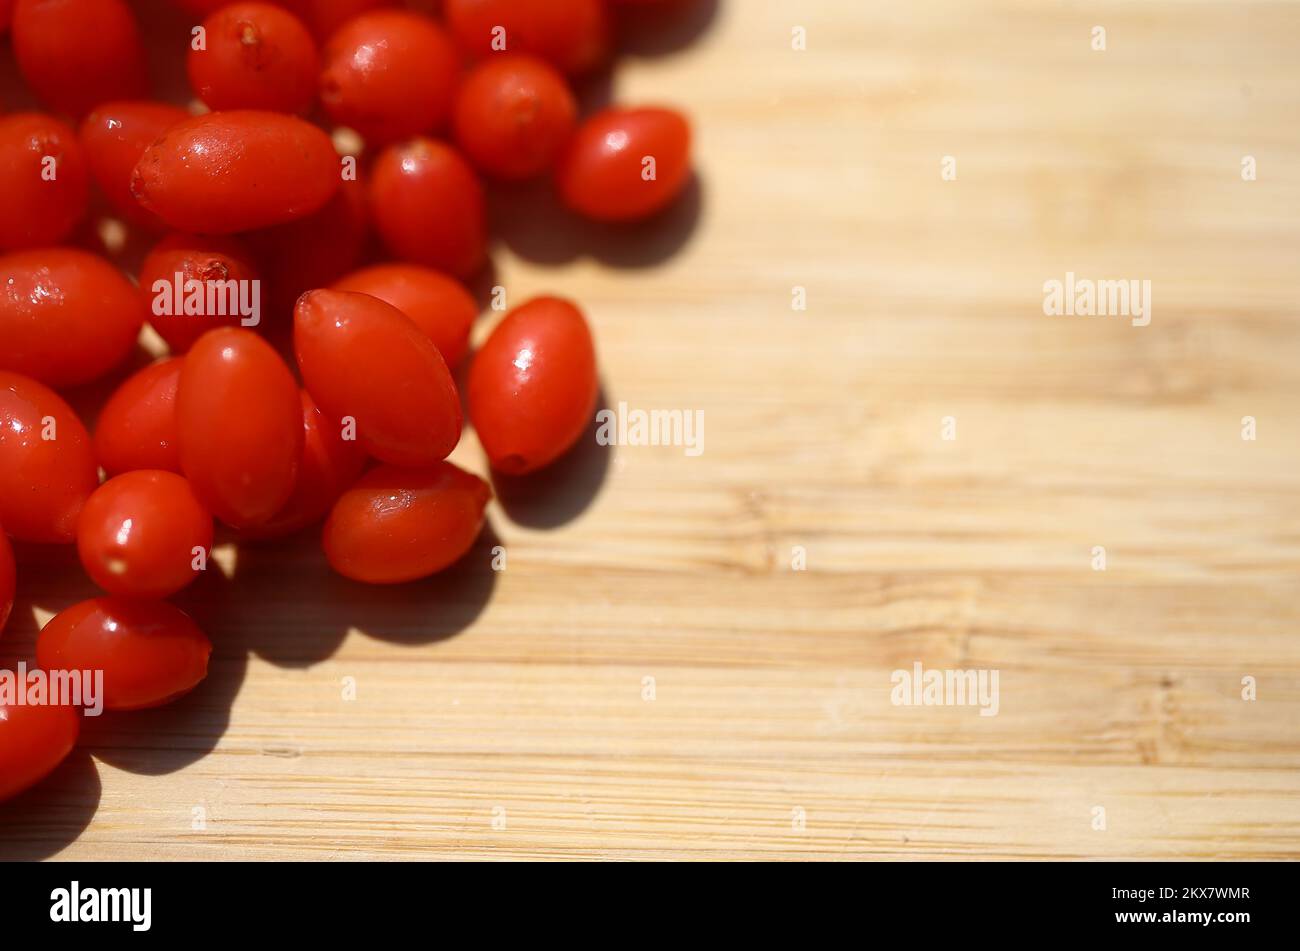 07.08.2018., Zagreb, Croatia - Goji berries. Low in calories, fat-free, a good source of fiber and a high-antioxidant food, goji berry benefits include the ability to help you fight disease, effectively manage your weight and experience better digestion. Usually eaten raw, dried, or in liquid or powder form, versatile goji berries contain a wide range of phytonutrients, vitamins and trace minerals, giving them the name “superfood berries” by many health experts. Photo: Igor Soban/PIXSELL  Stock Photo